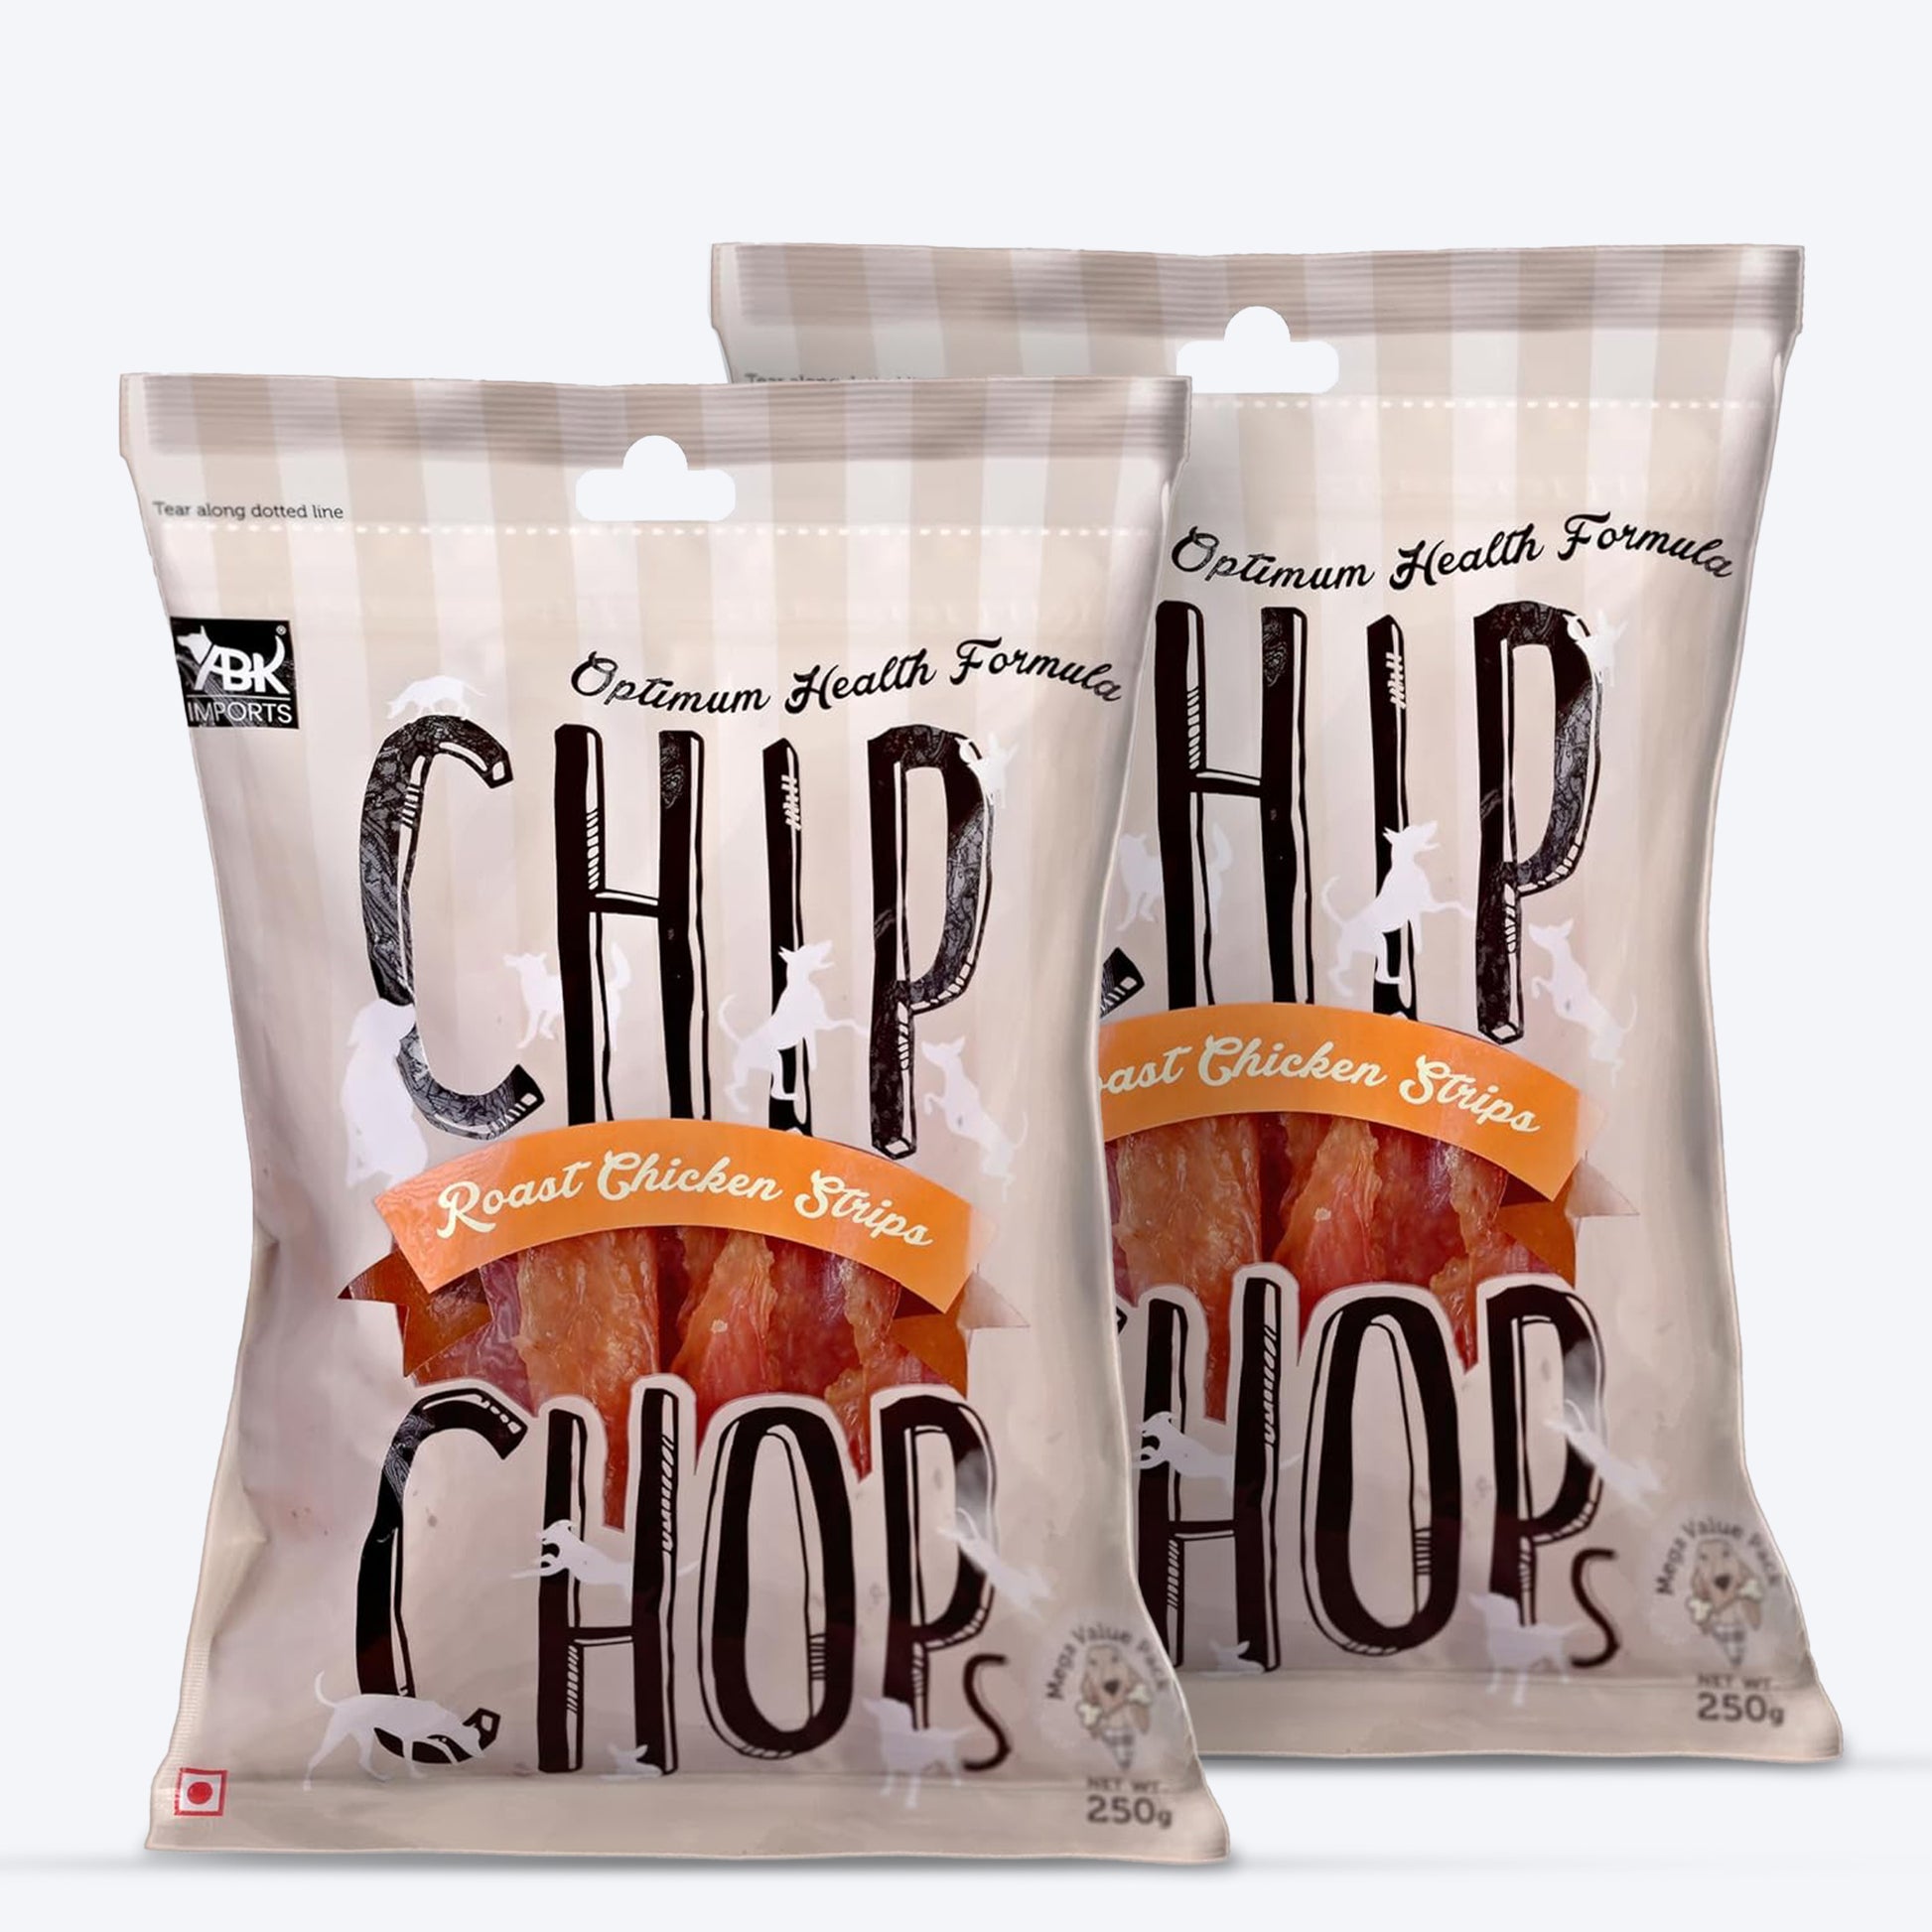 Chip Chops Dog Treats - Roast Chicken Strips - Heads Up For Tails